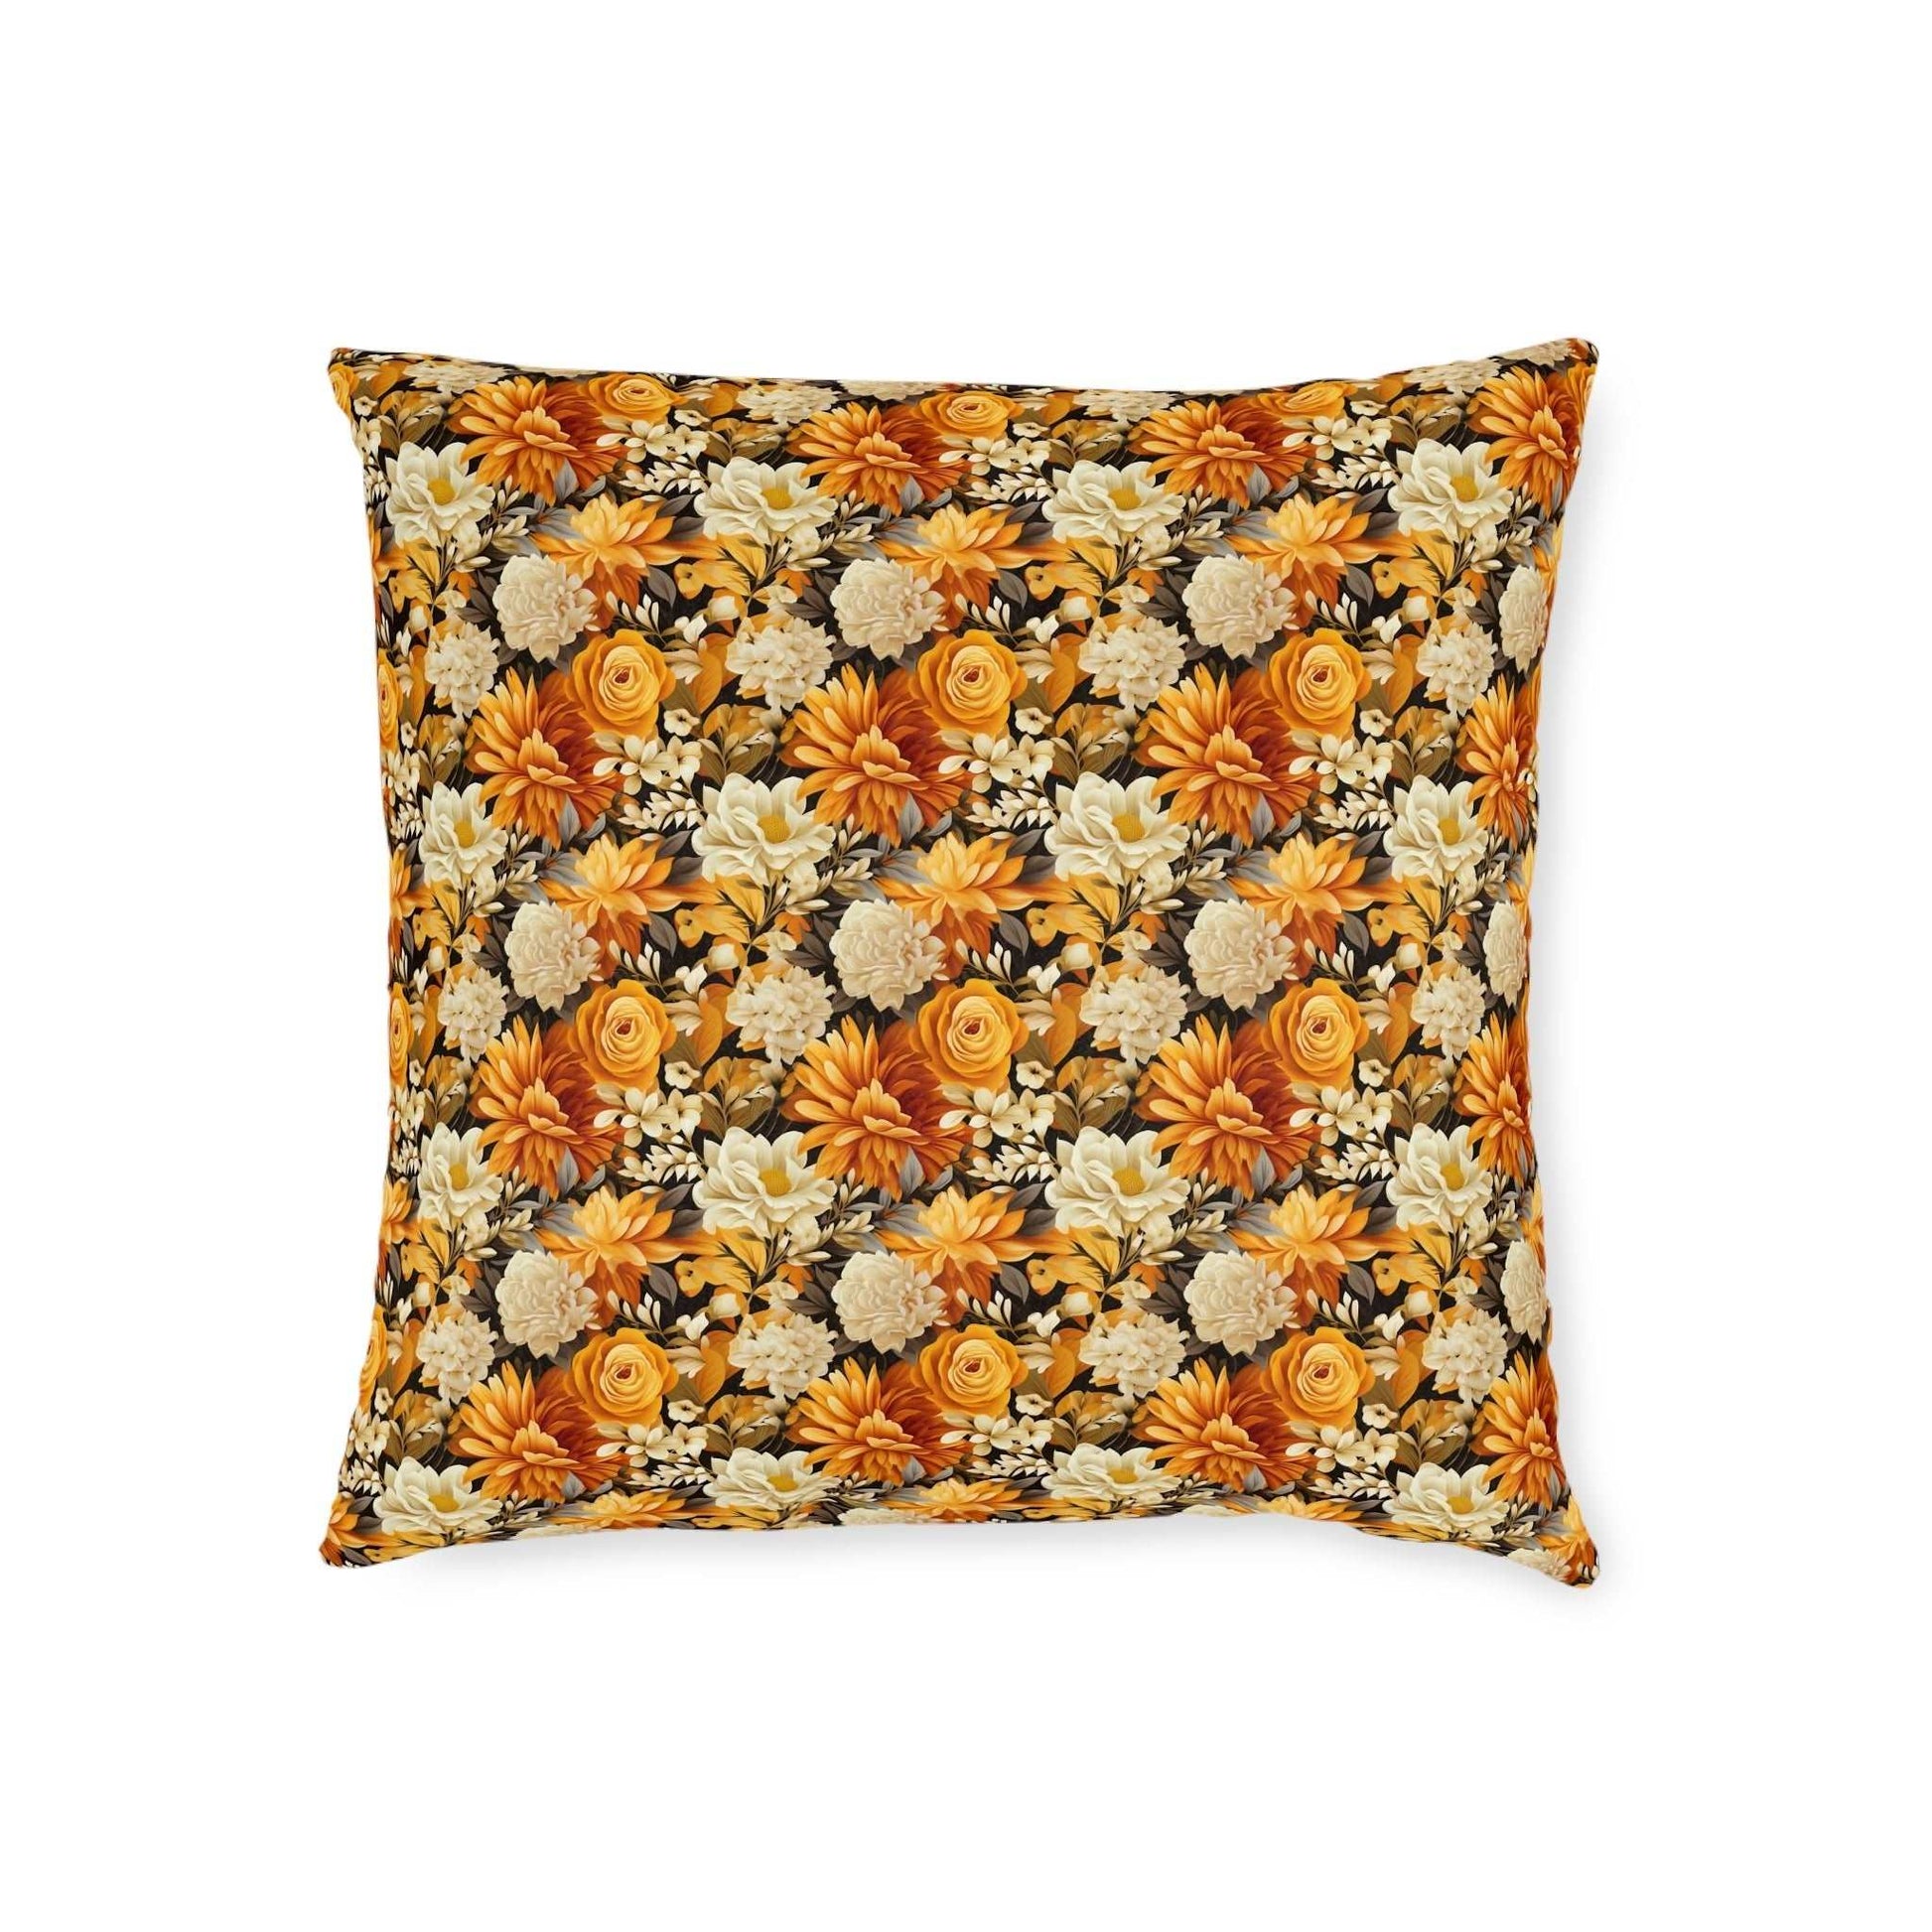 Autumnal Romance: Golden and White Blossoms on Black - Square Pillow - Pattern Symphony